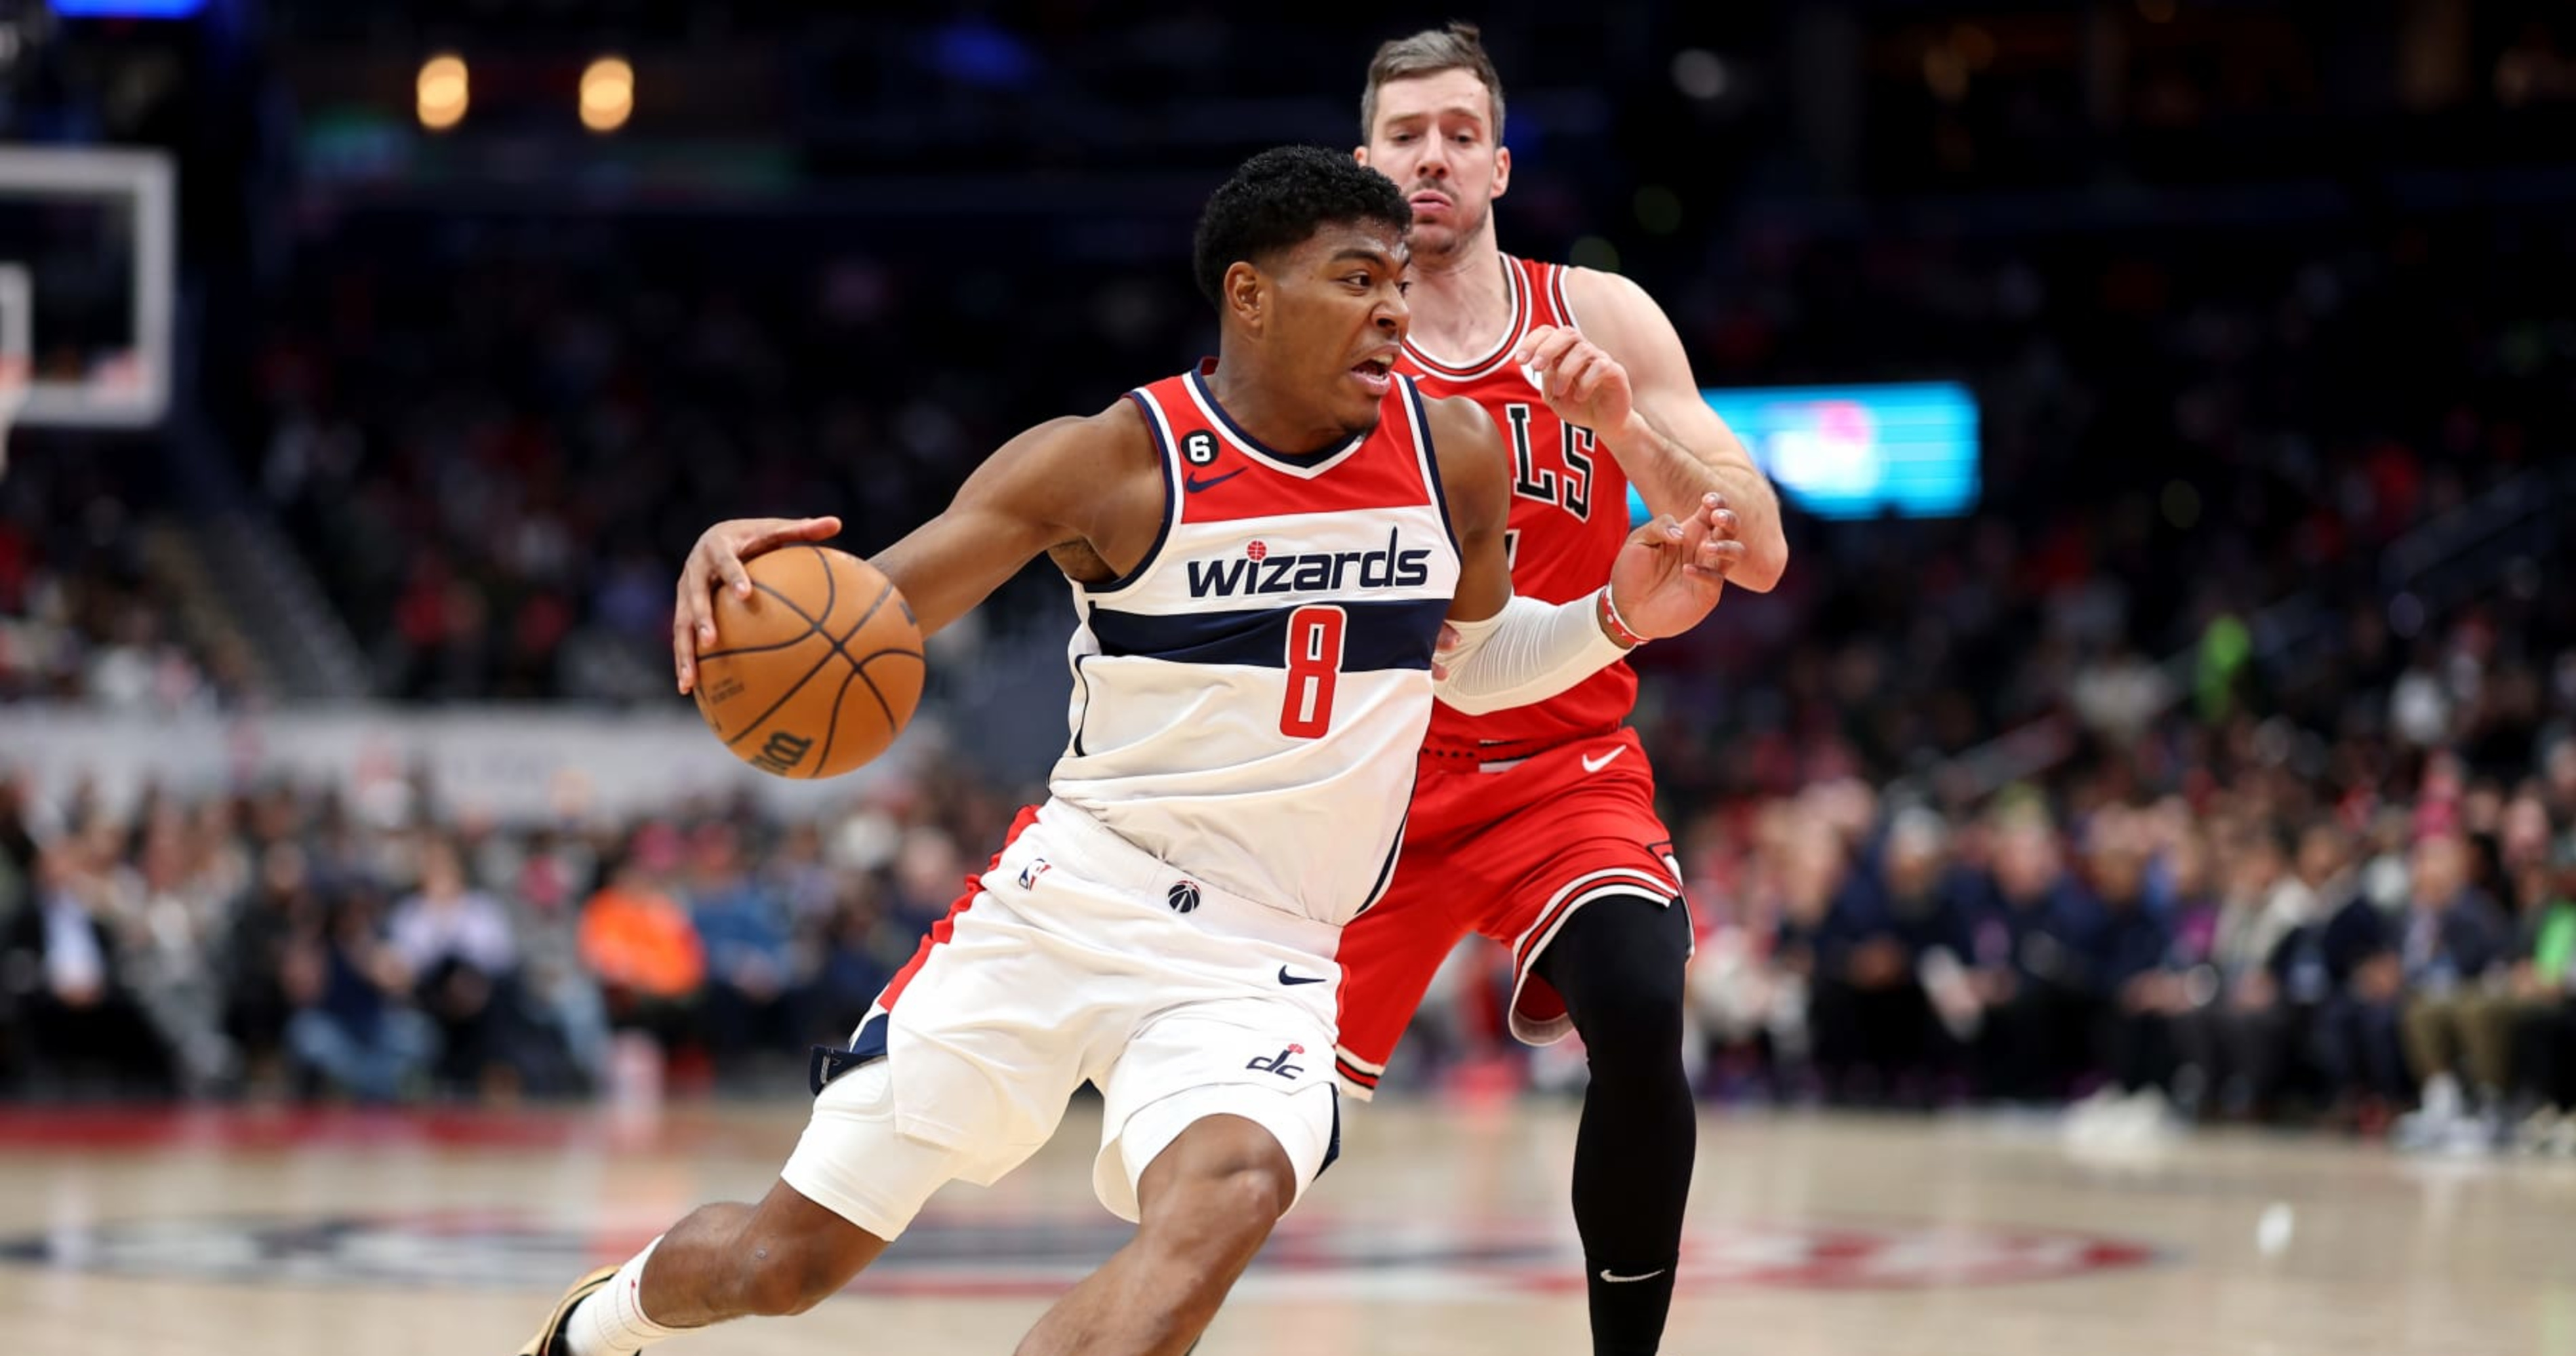 The Wizards Are Talking To Teams About Trading Rui Hachimura